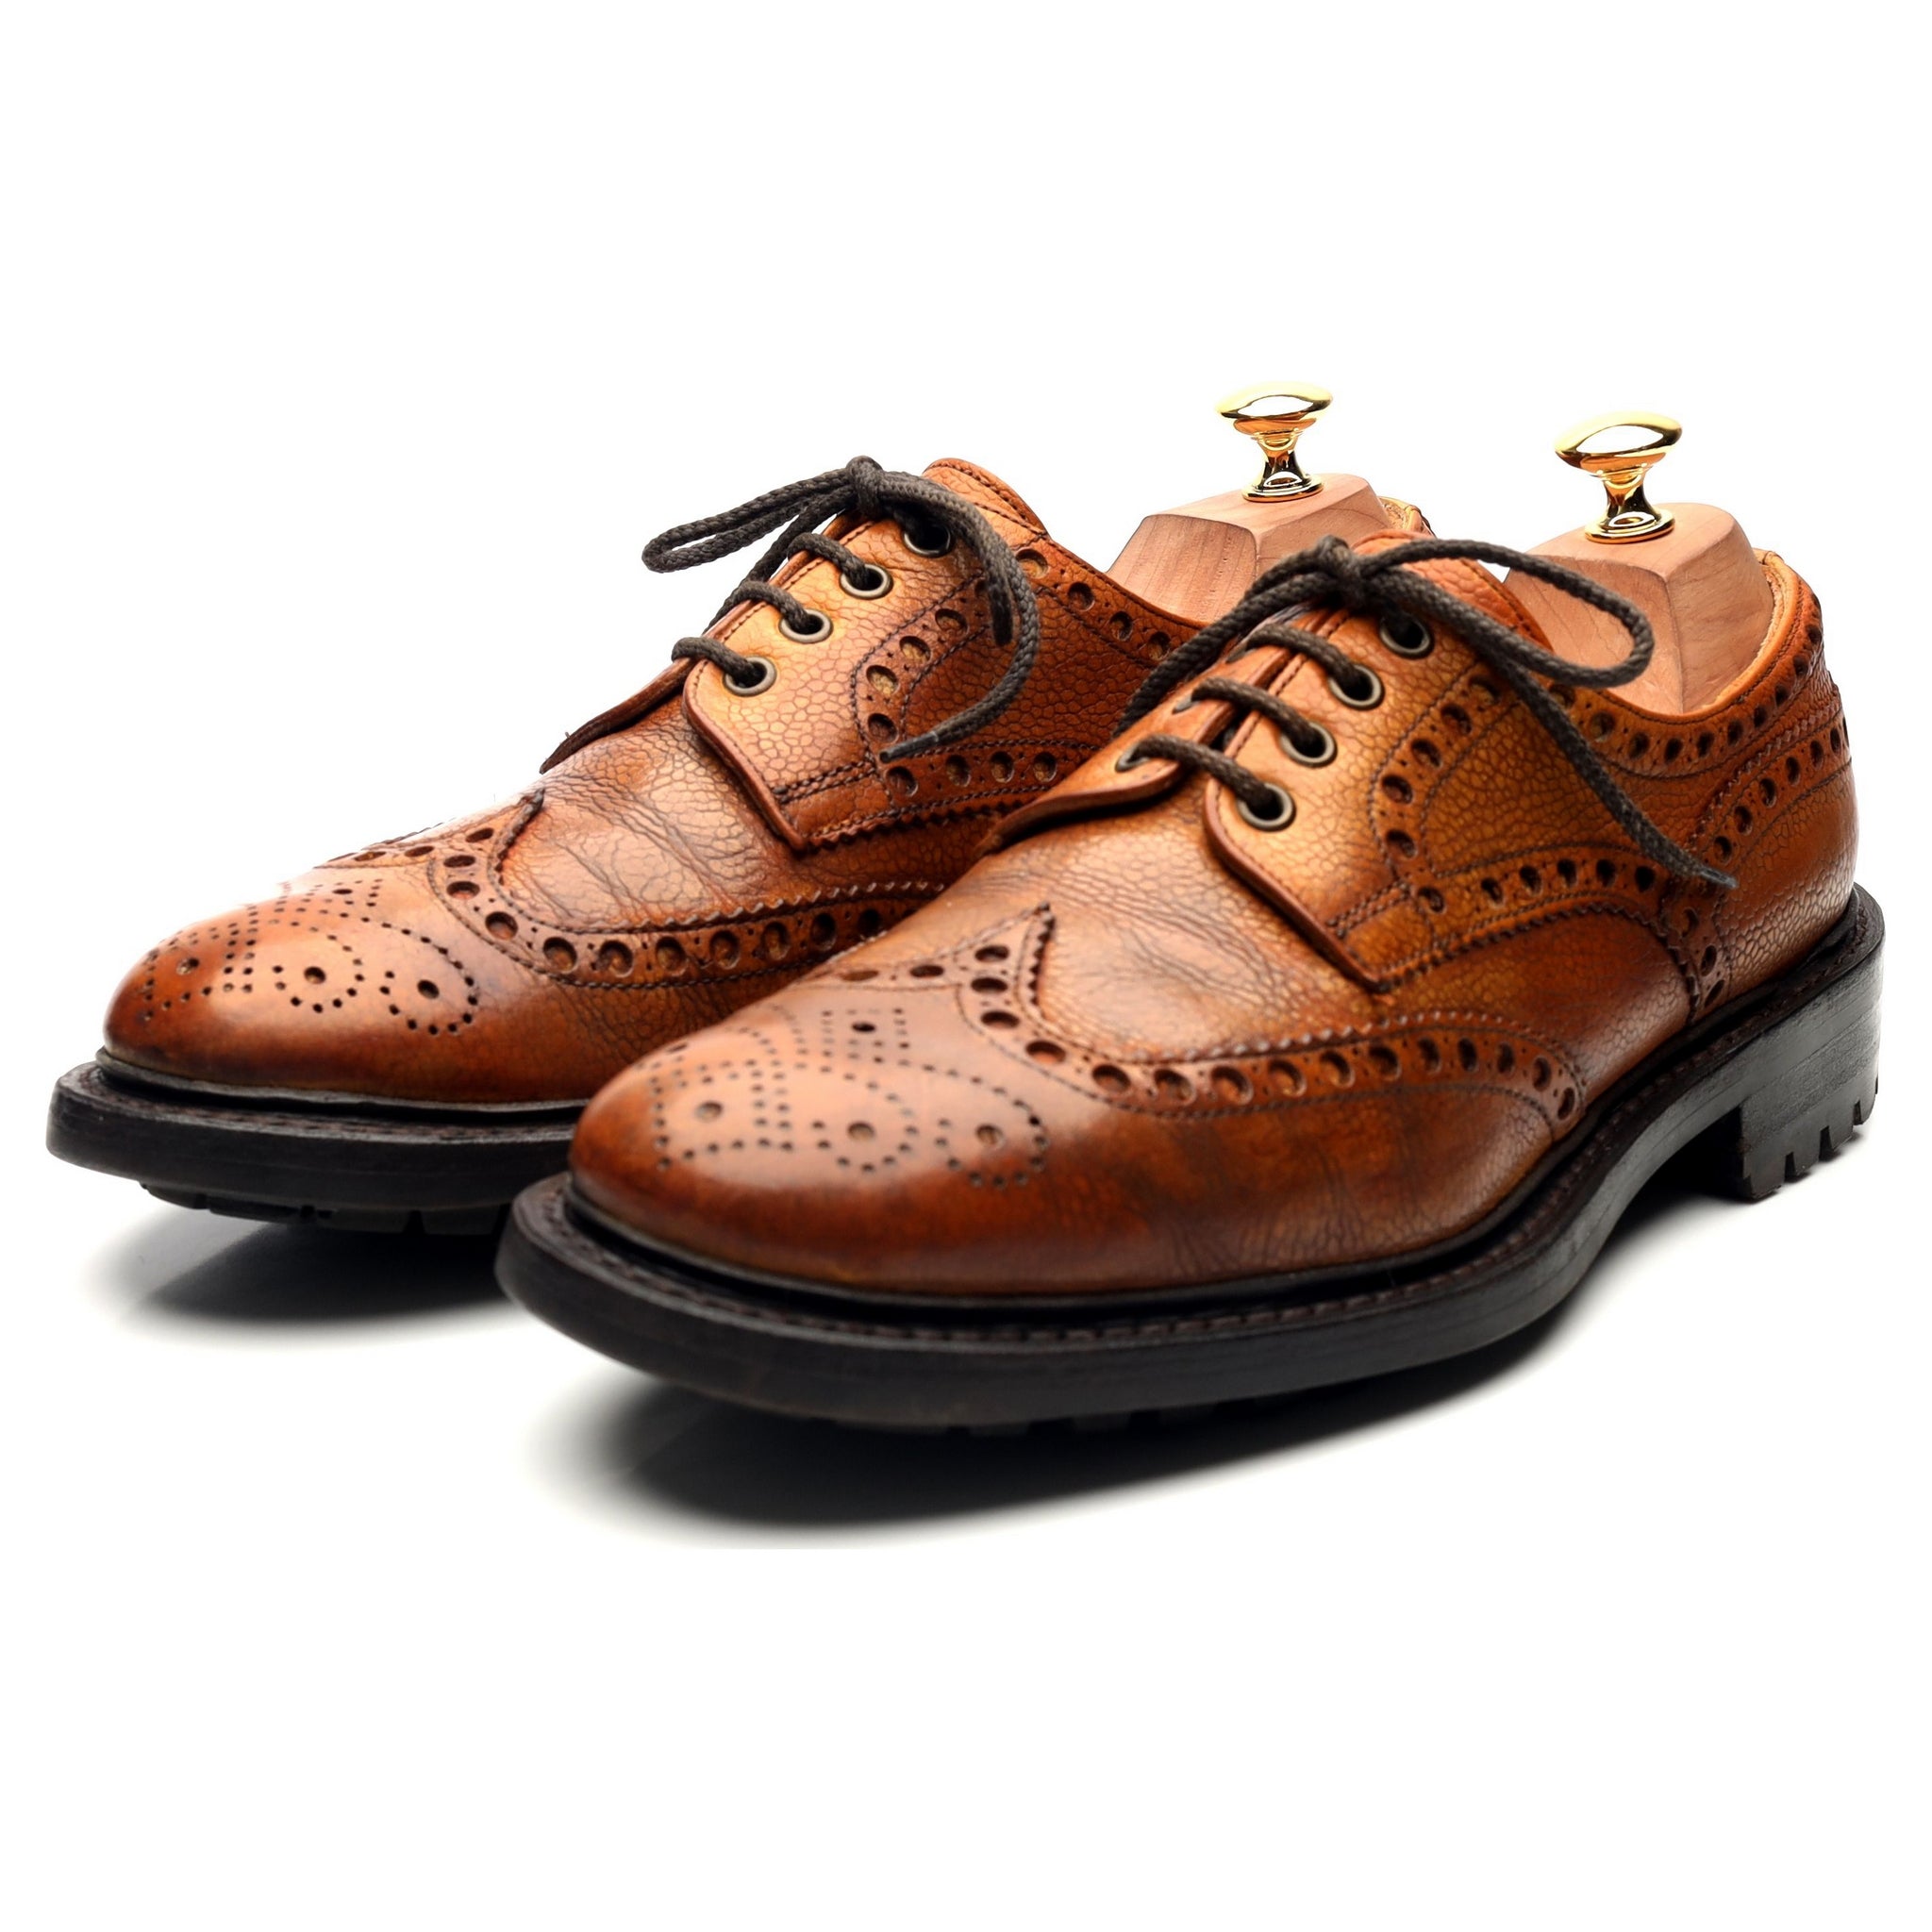 Avon' Tan Brown Leather Derby Brogues UK 10 F - Abbot's Shoes